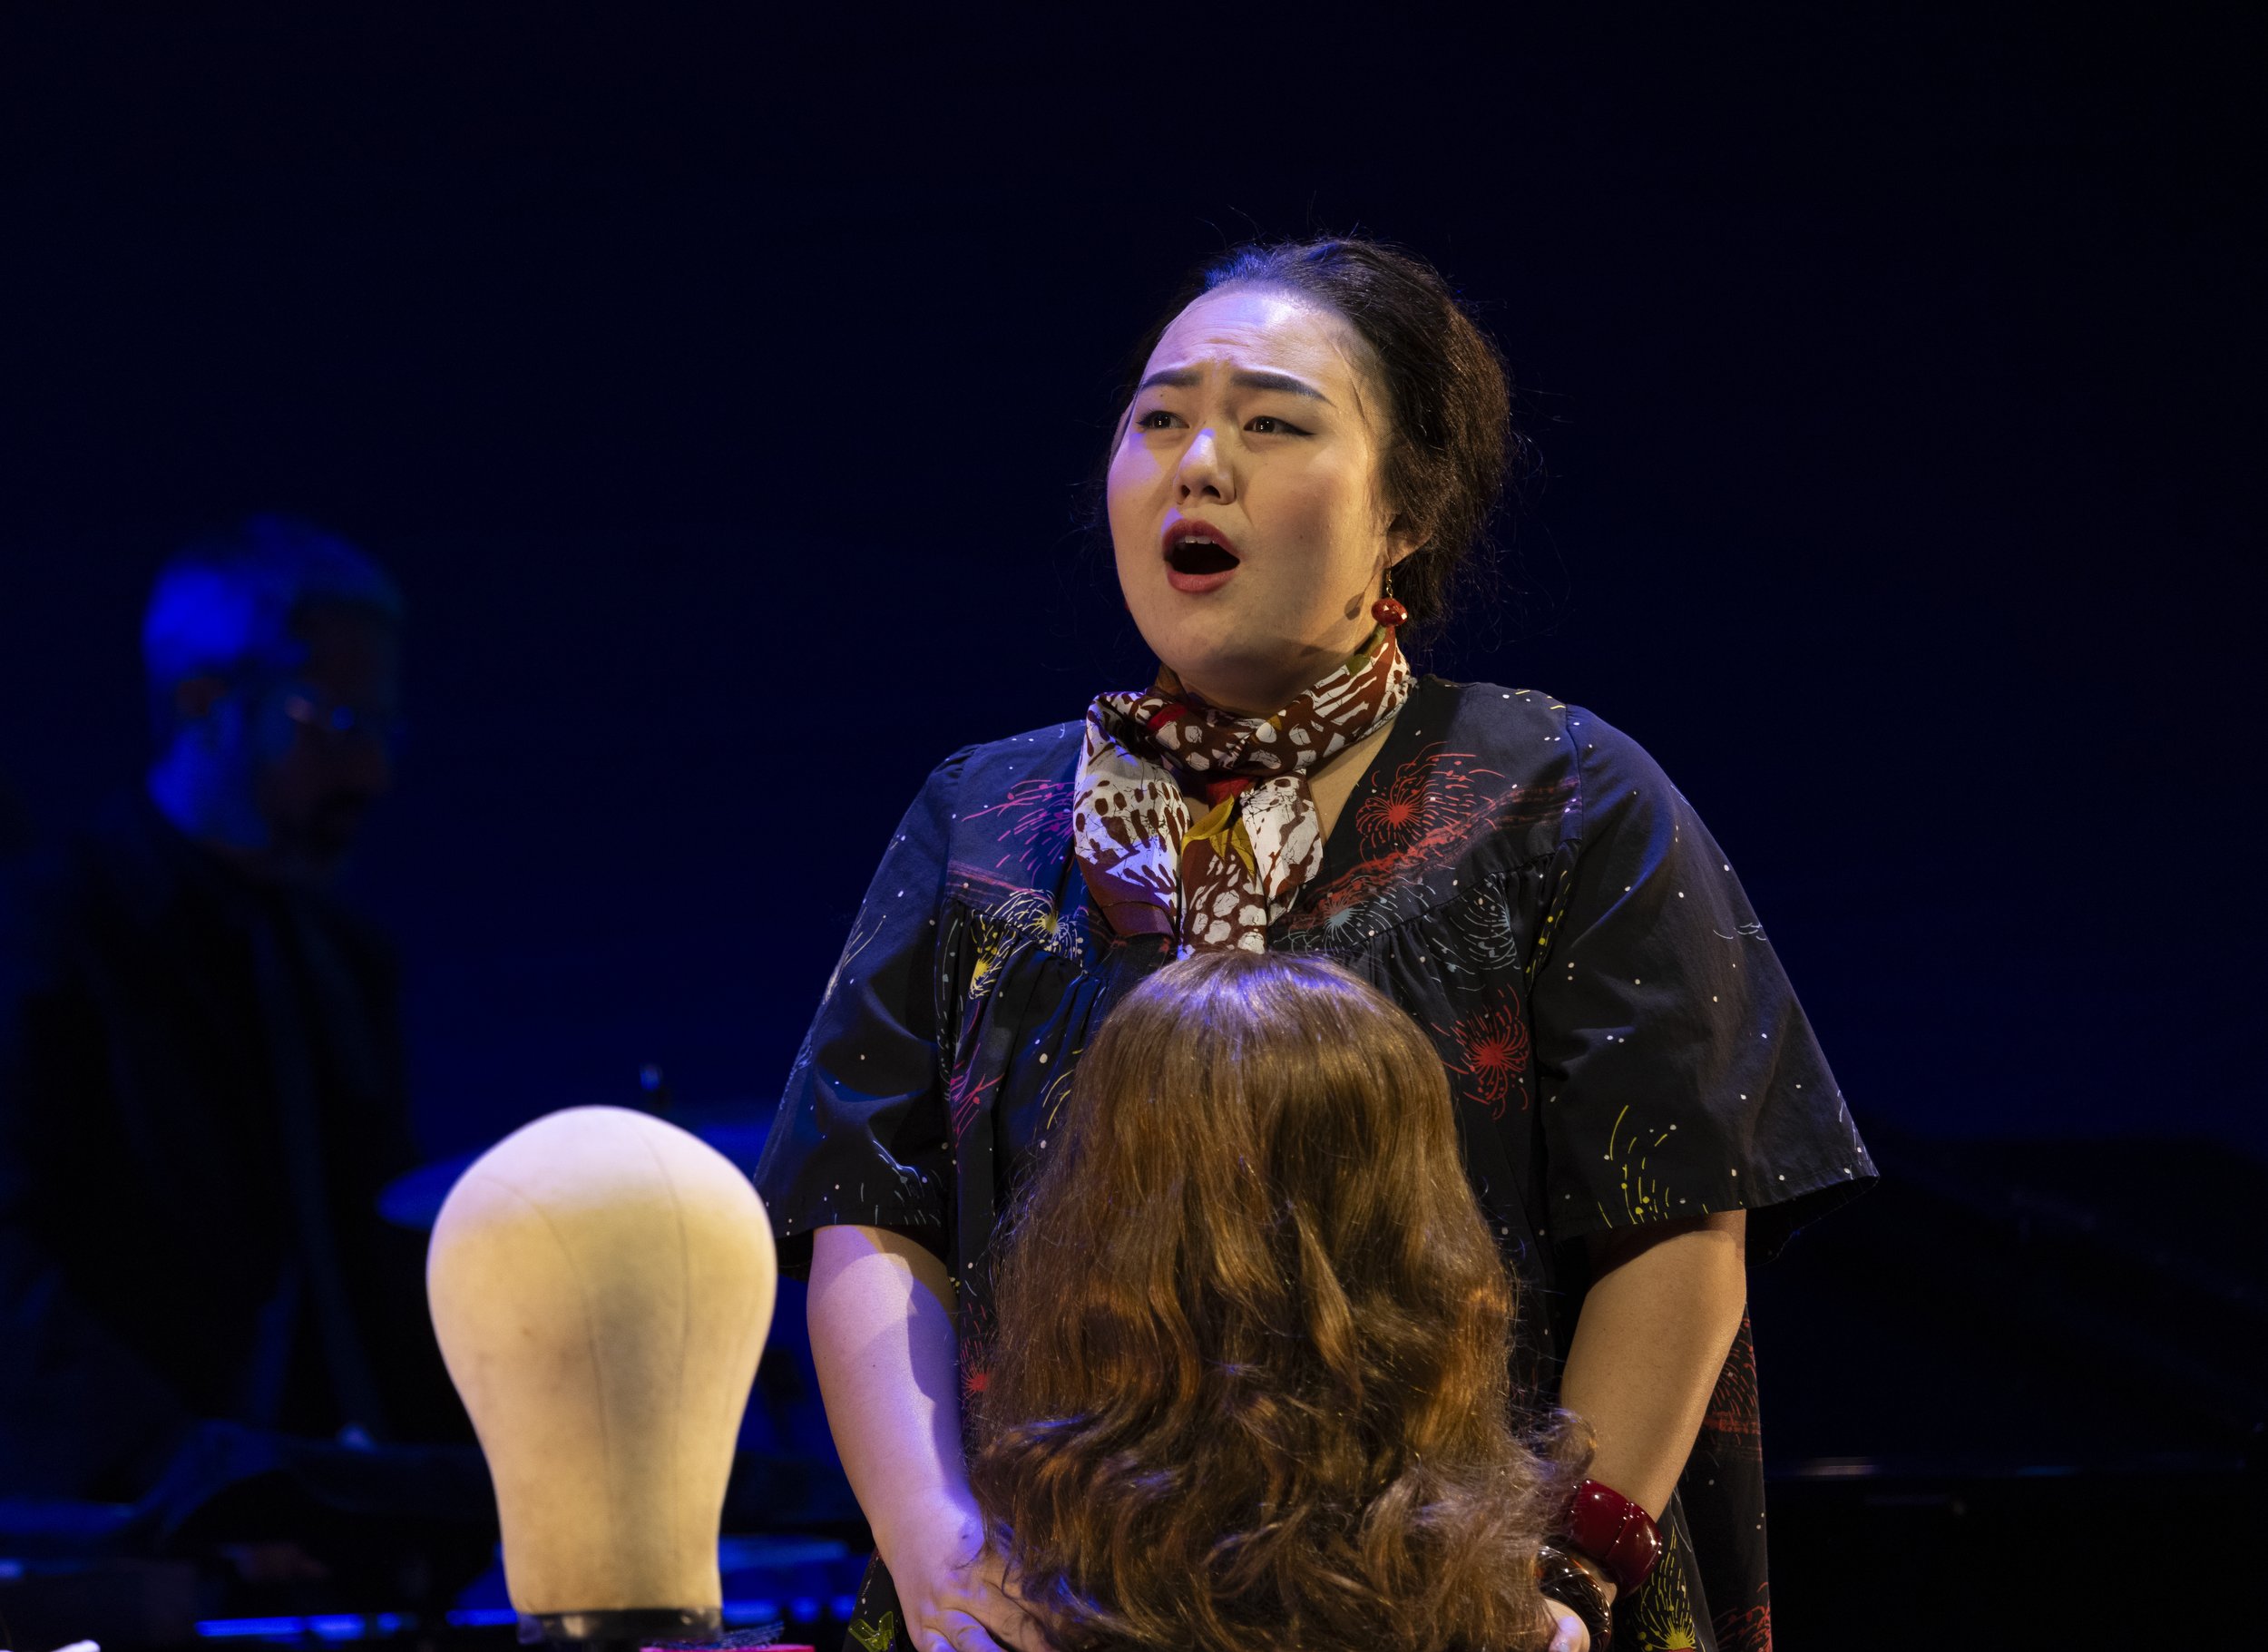 Tiffany Choe (Esther) in Hairpiece_photo by Bronwen Sharp.jpg